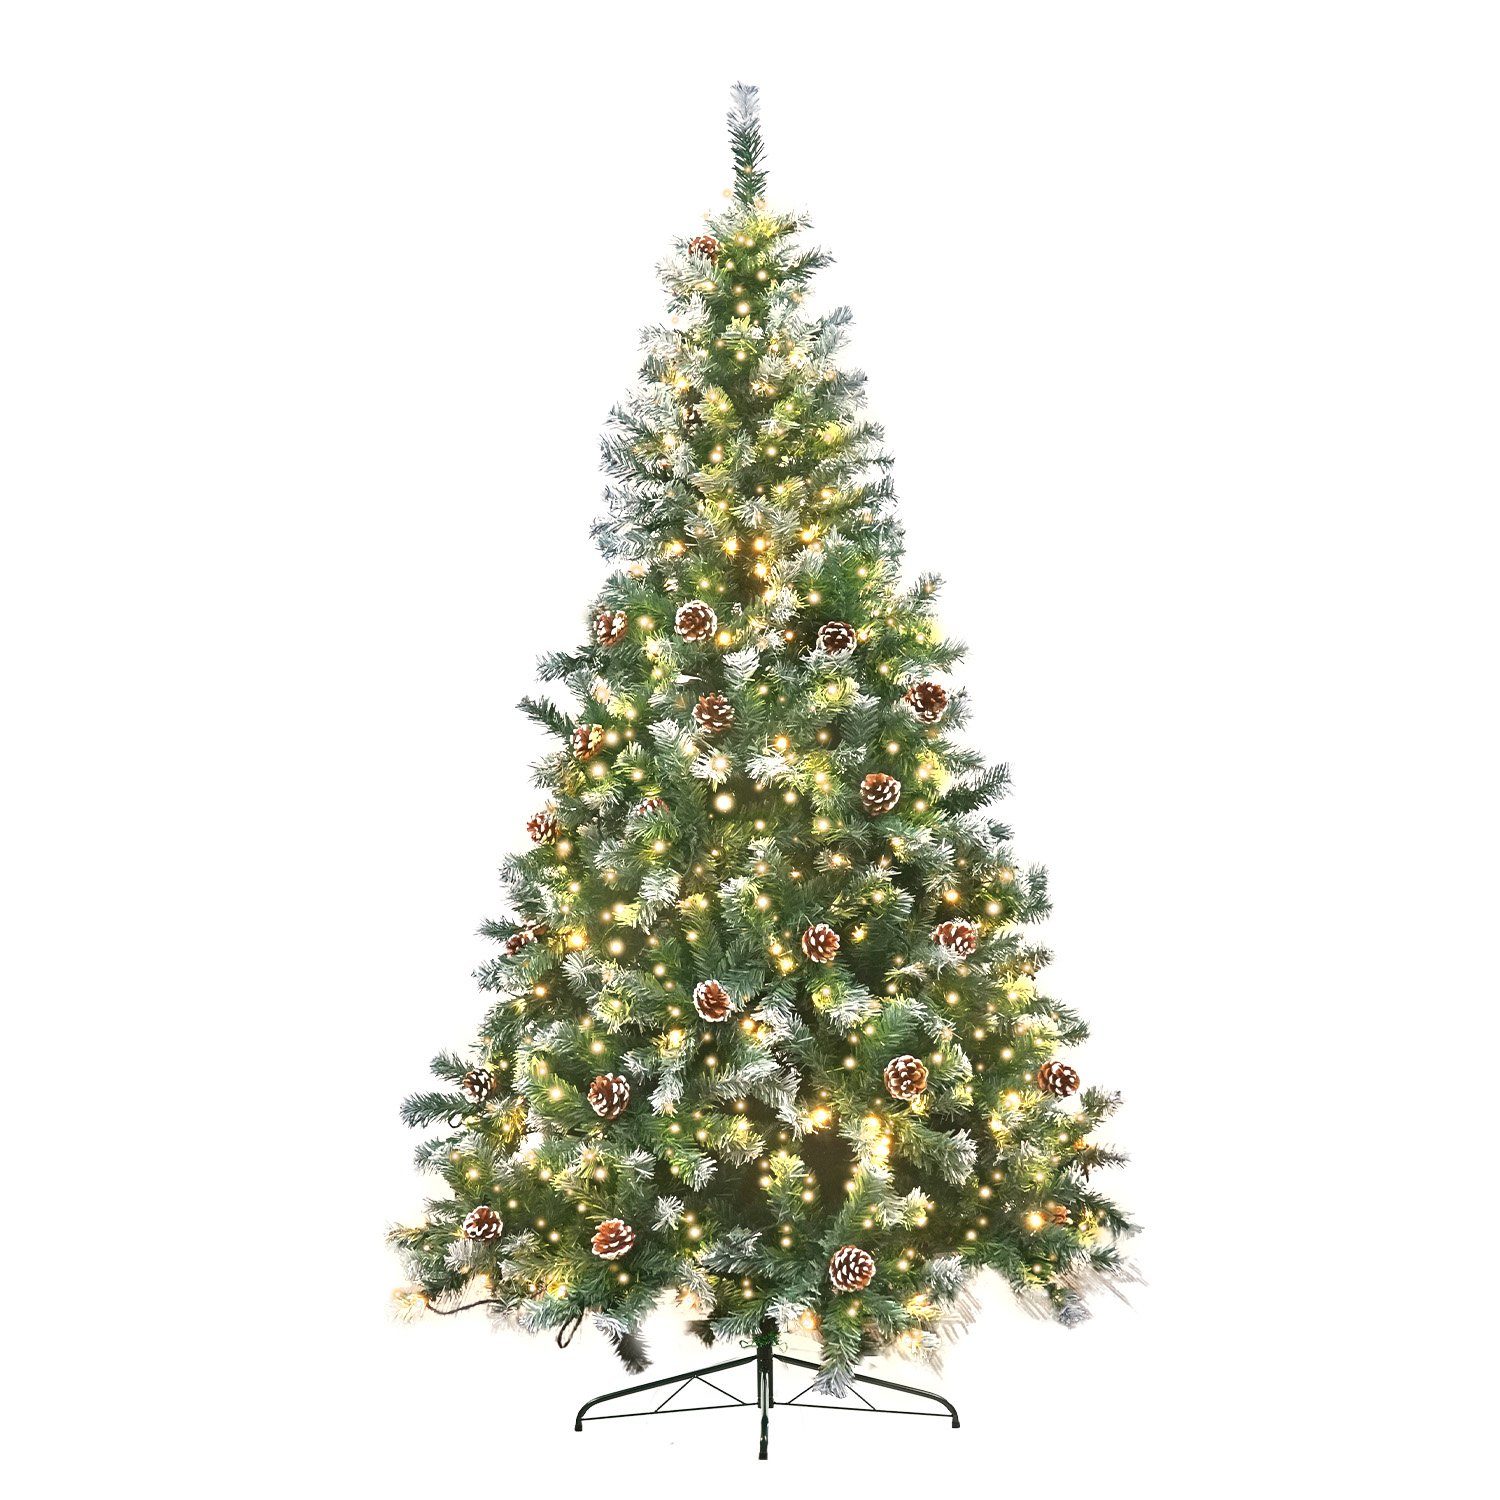 Christabelle 2.4m Pre Lit LED Christmas Tree with Pine Cones 1